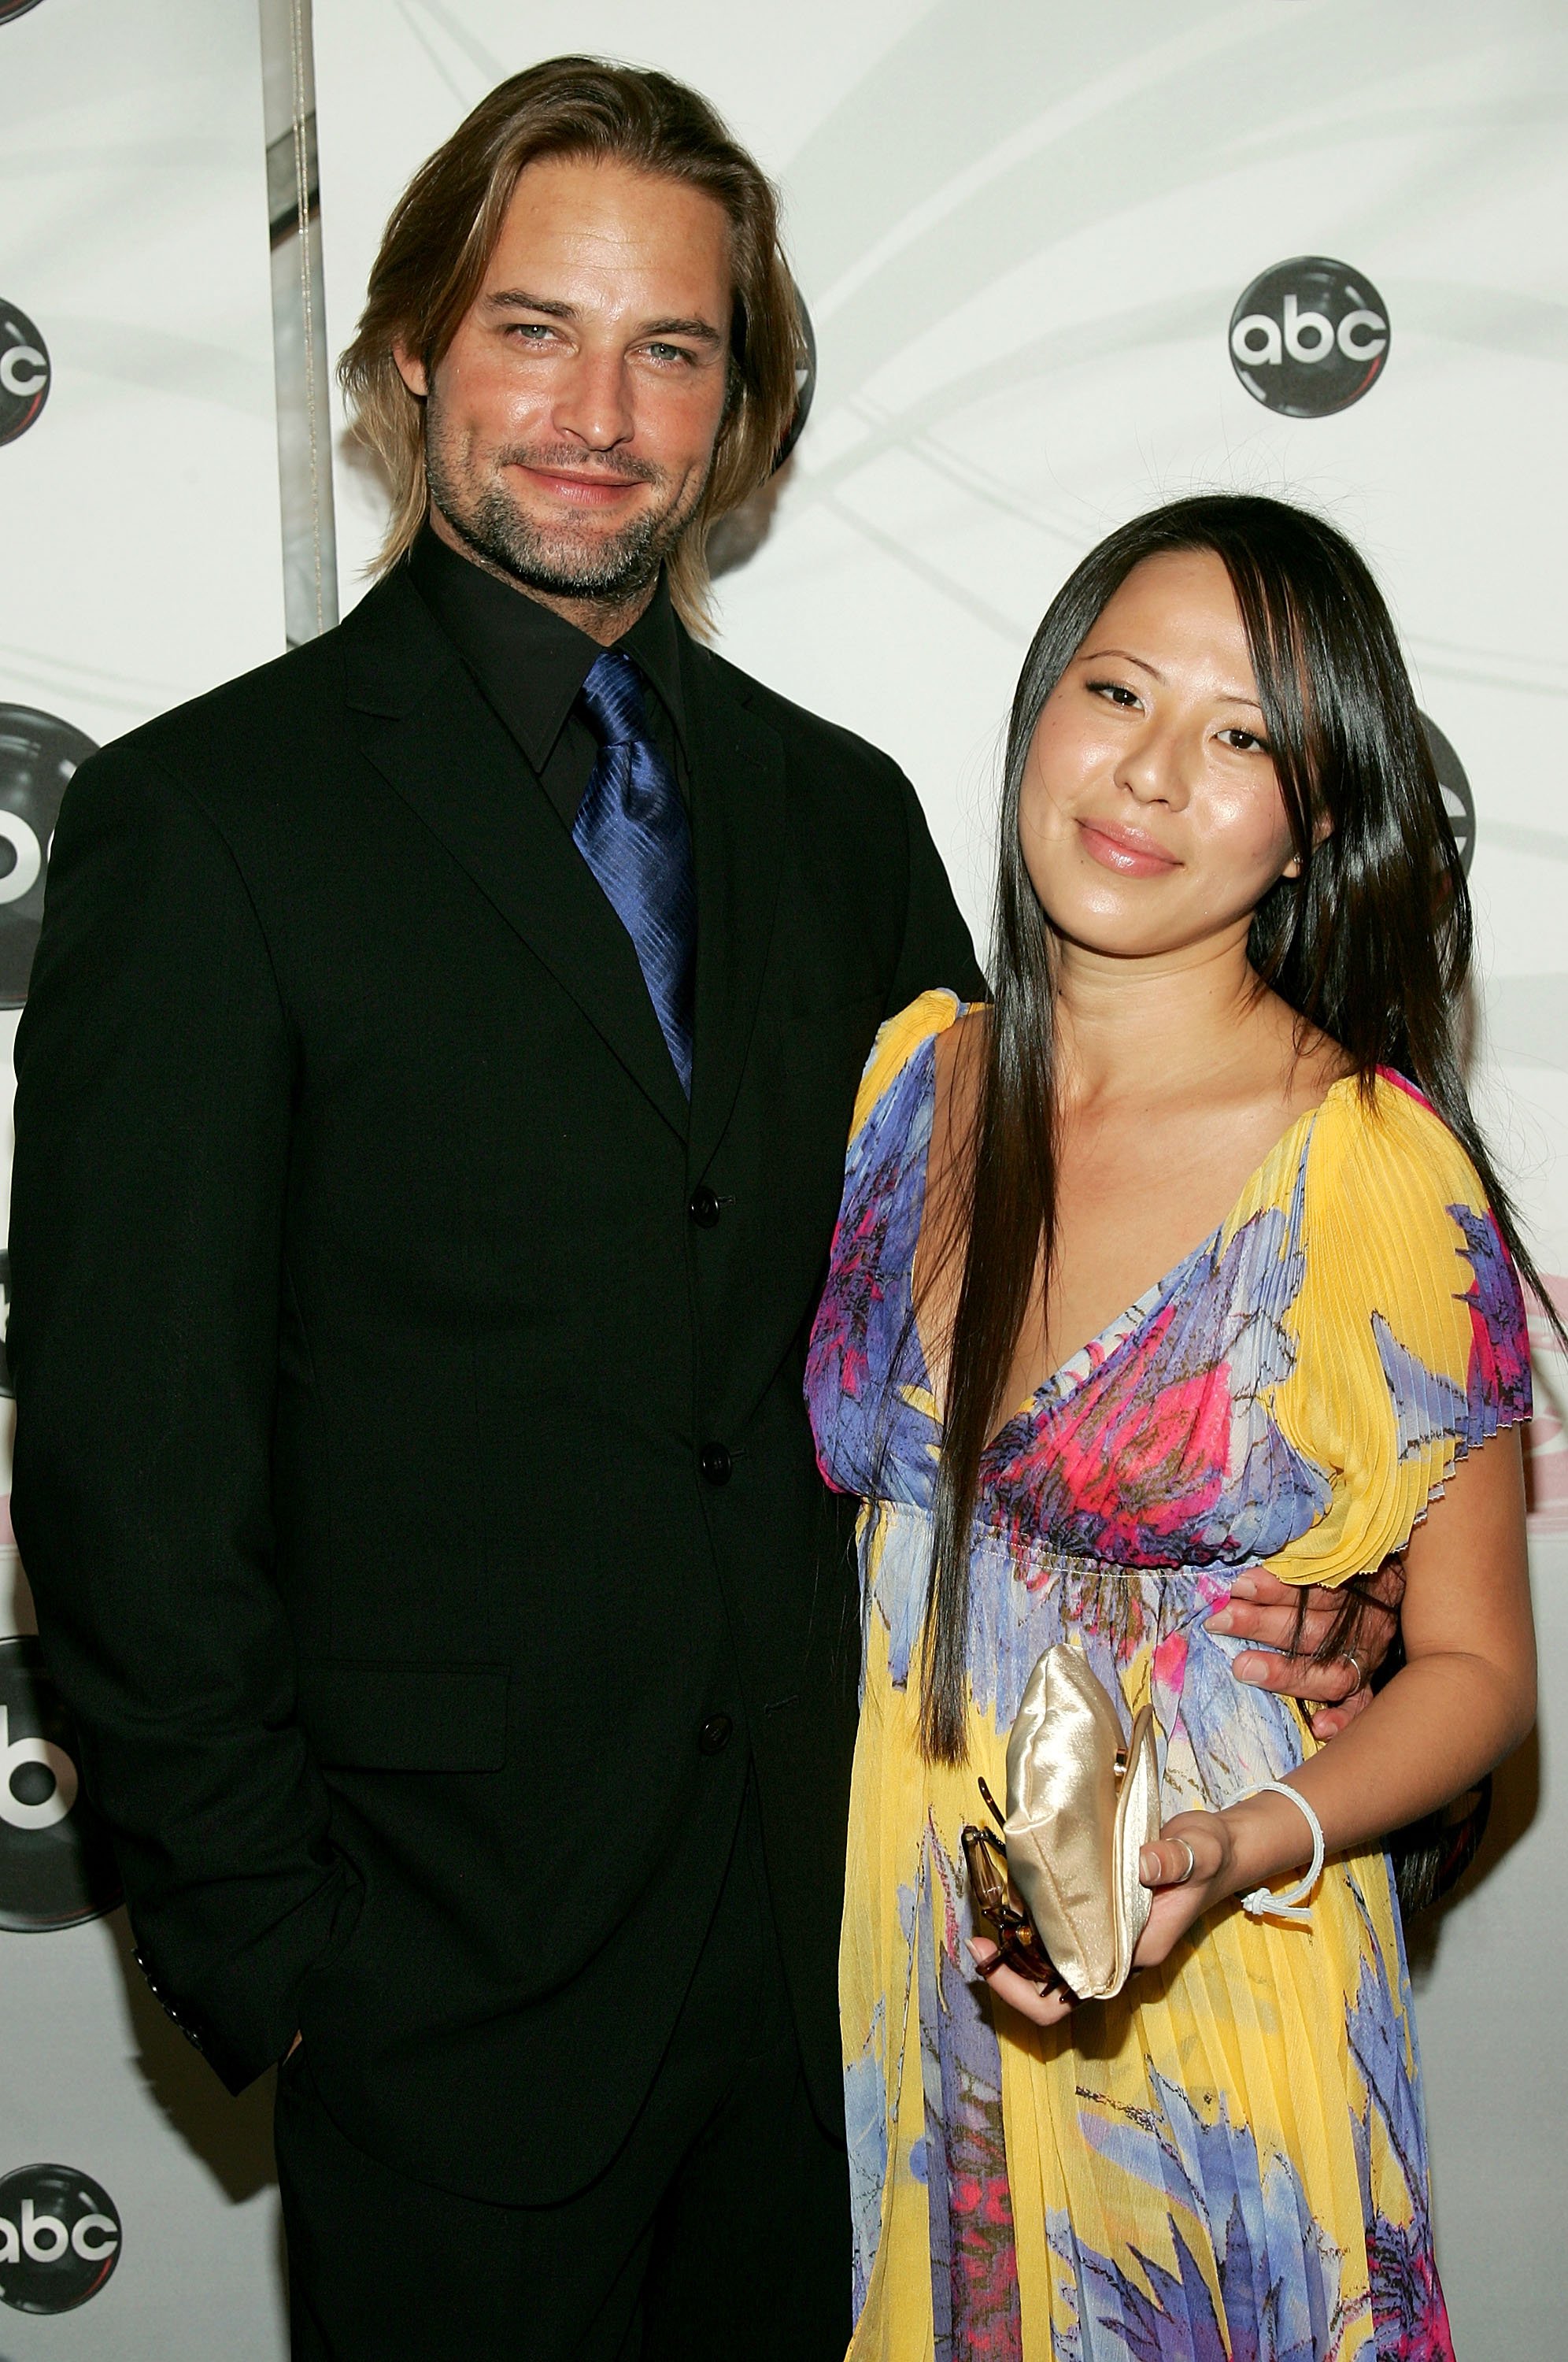 Josh Holloway and Yessica Kumala at the ABC Upfront presentation on May 15, 2007. | Source: Getty Images